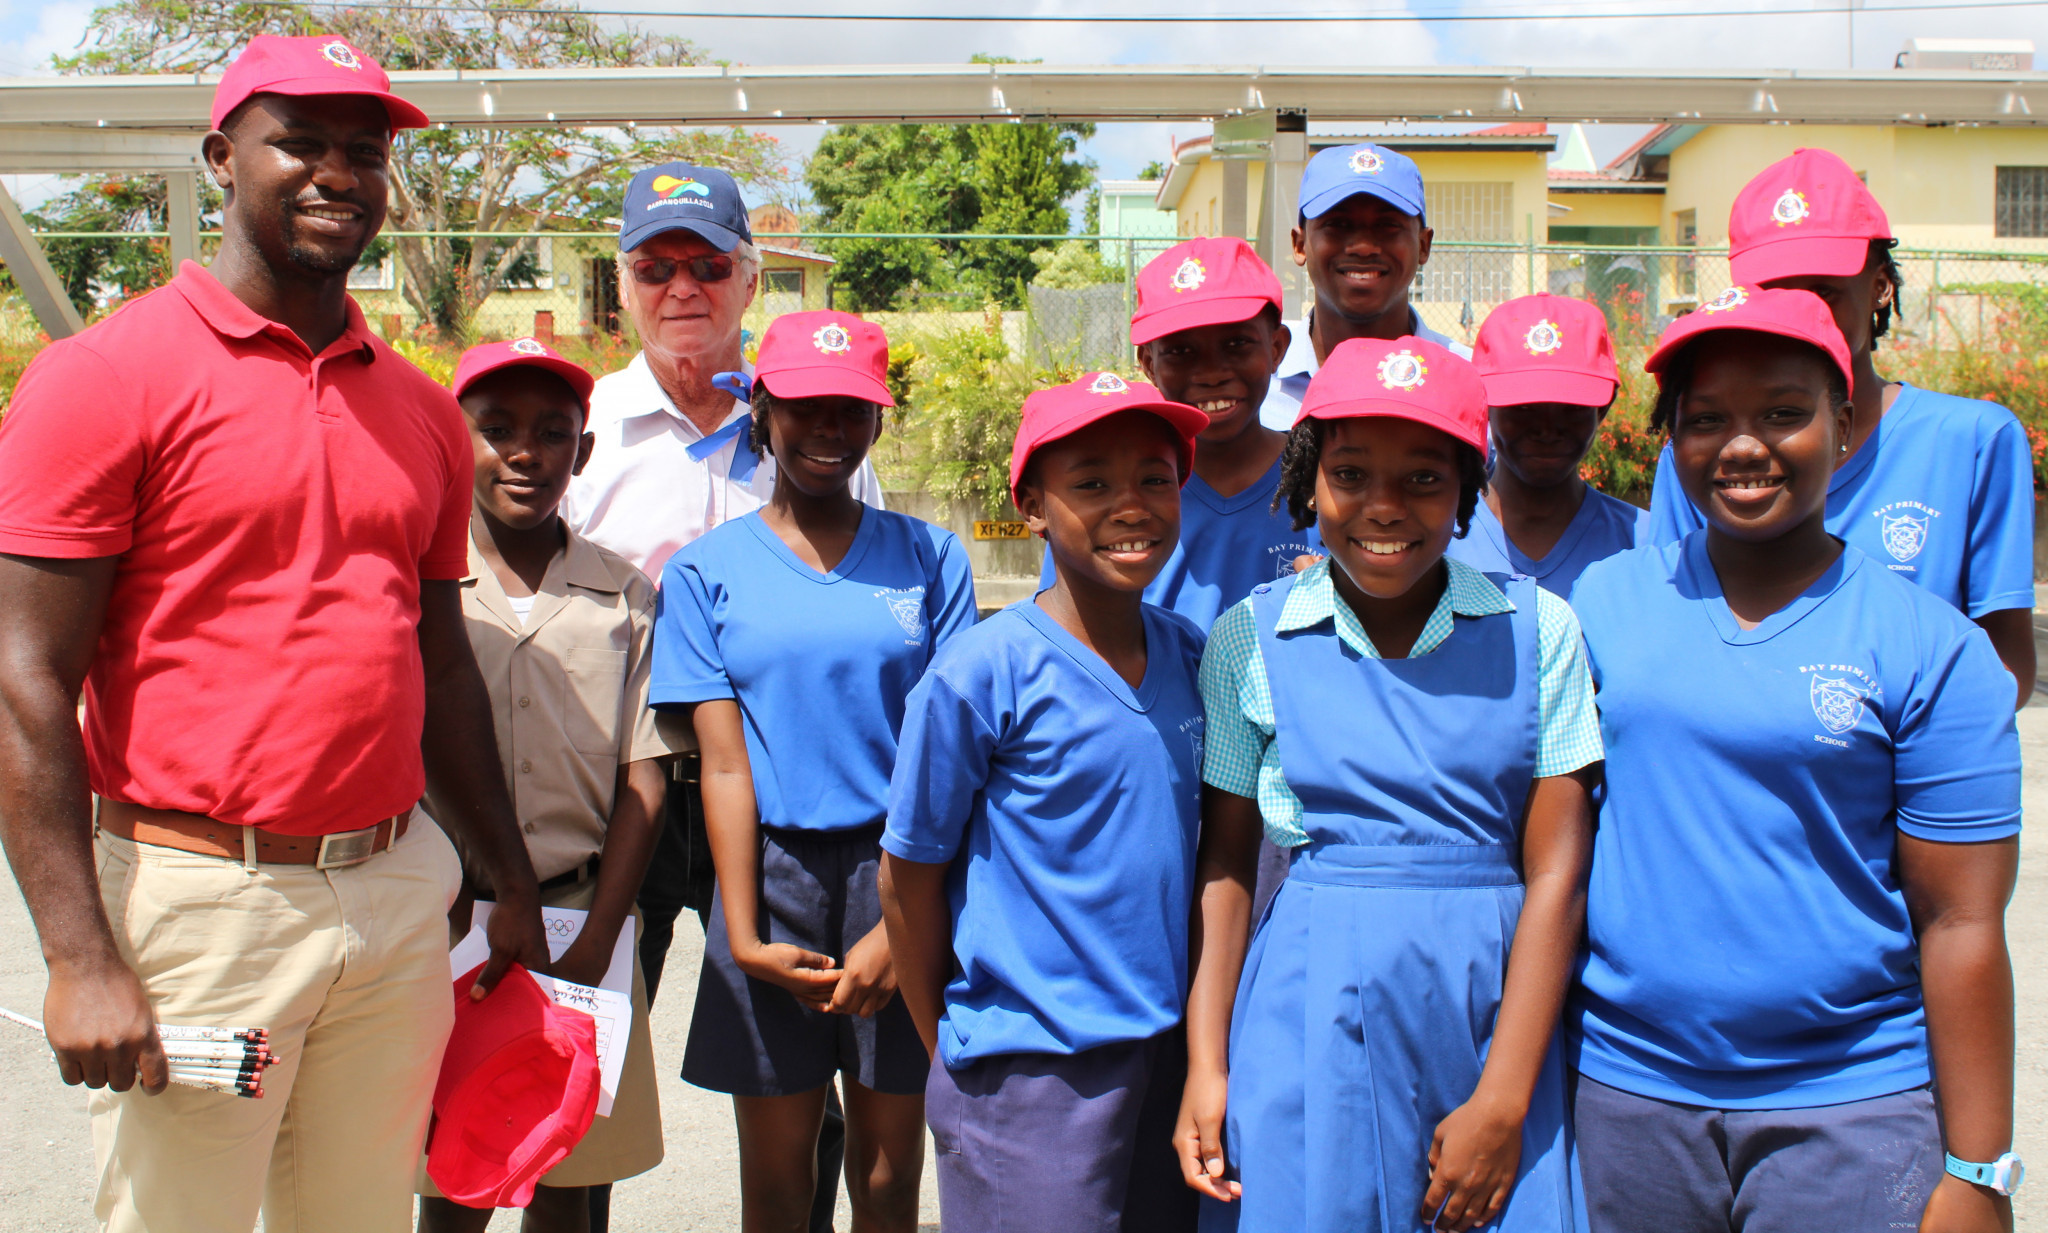 Primary school event held in Barbados to celebrate Olympic Day 